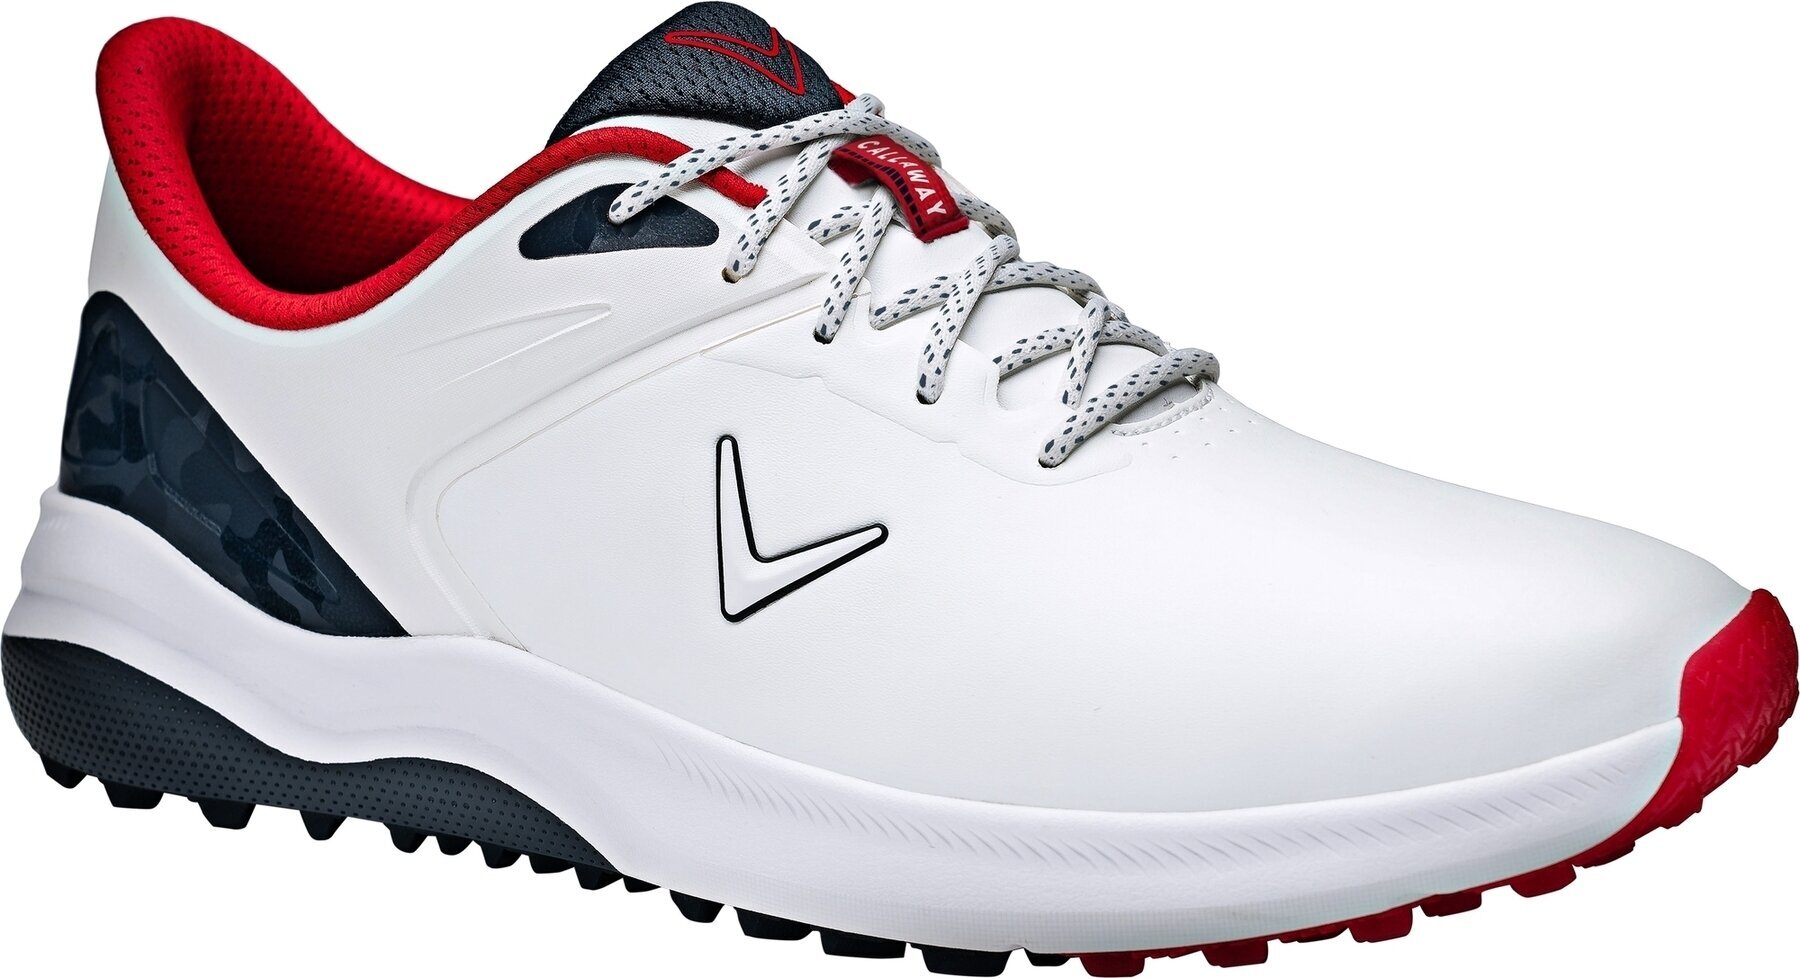 Chaussures de golf pour hommes Callaway Lazer Mens Golf Shoes White/Navy/Red 44,5